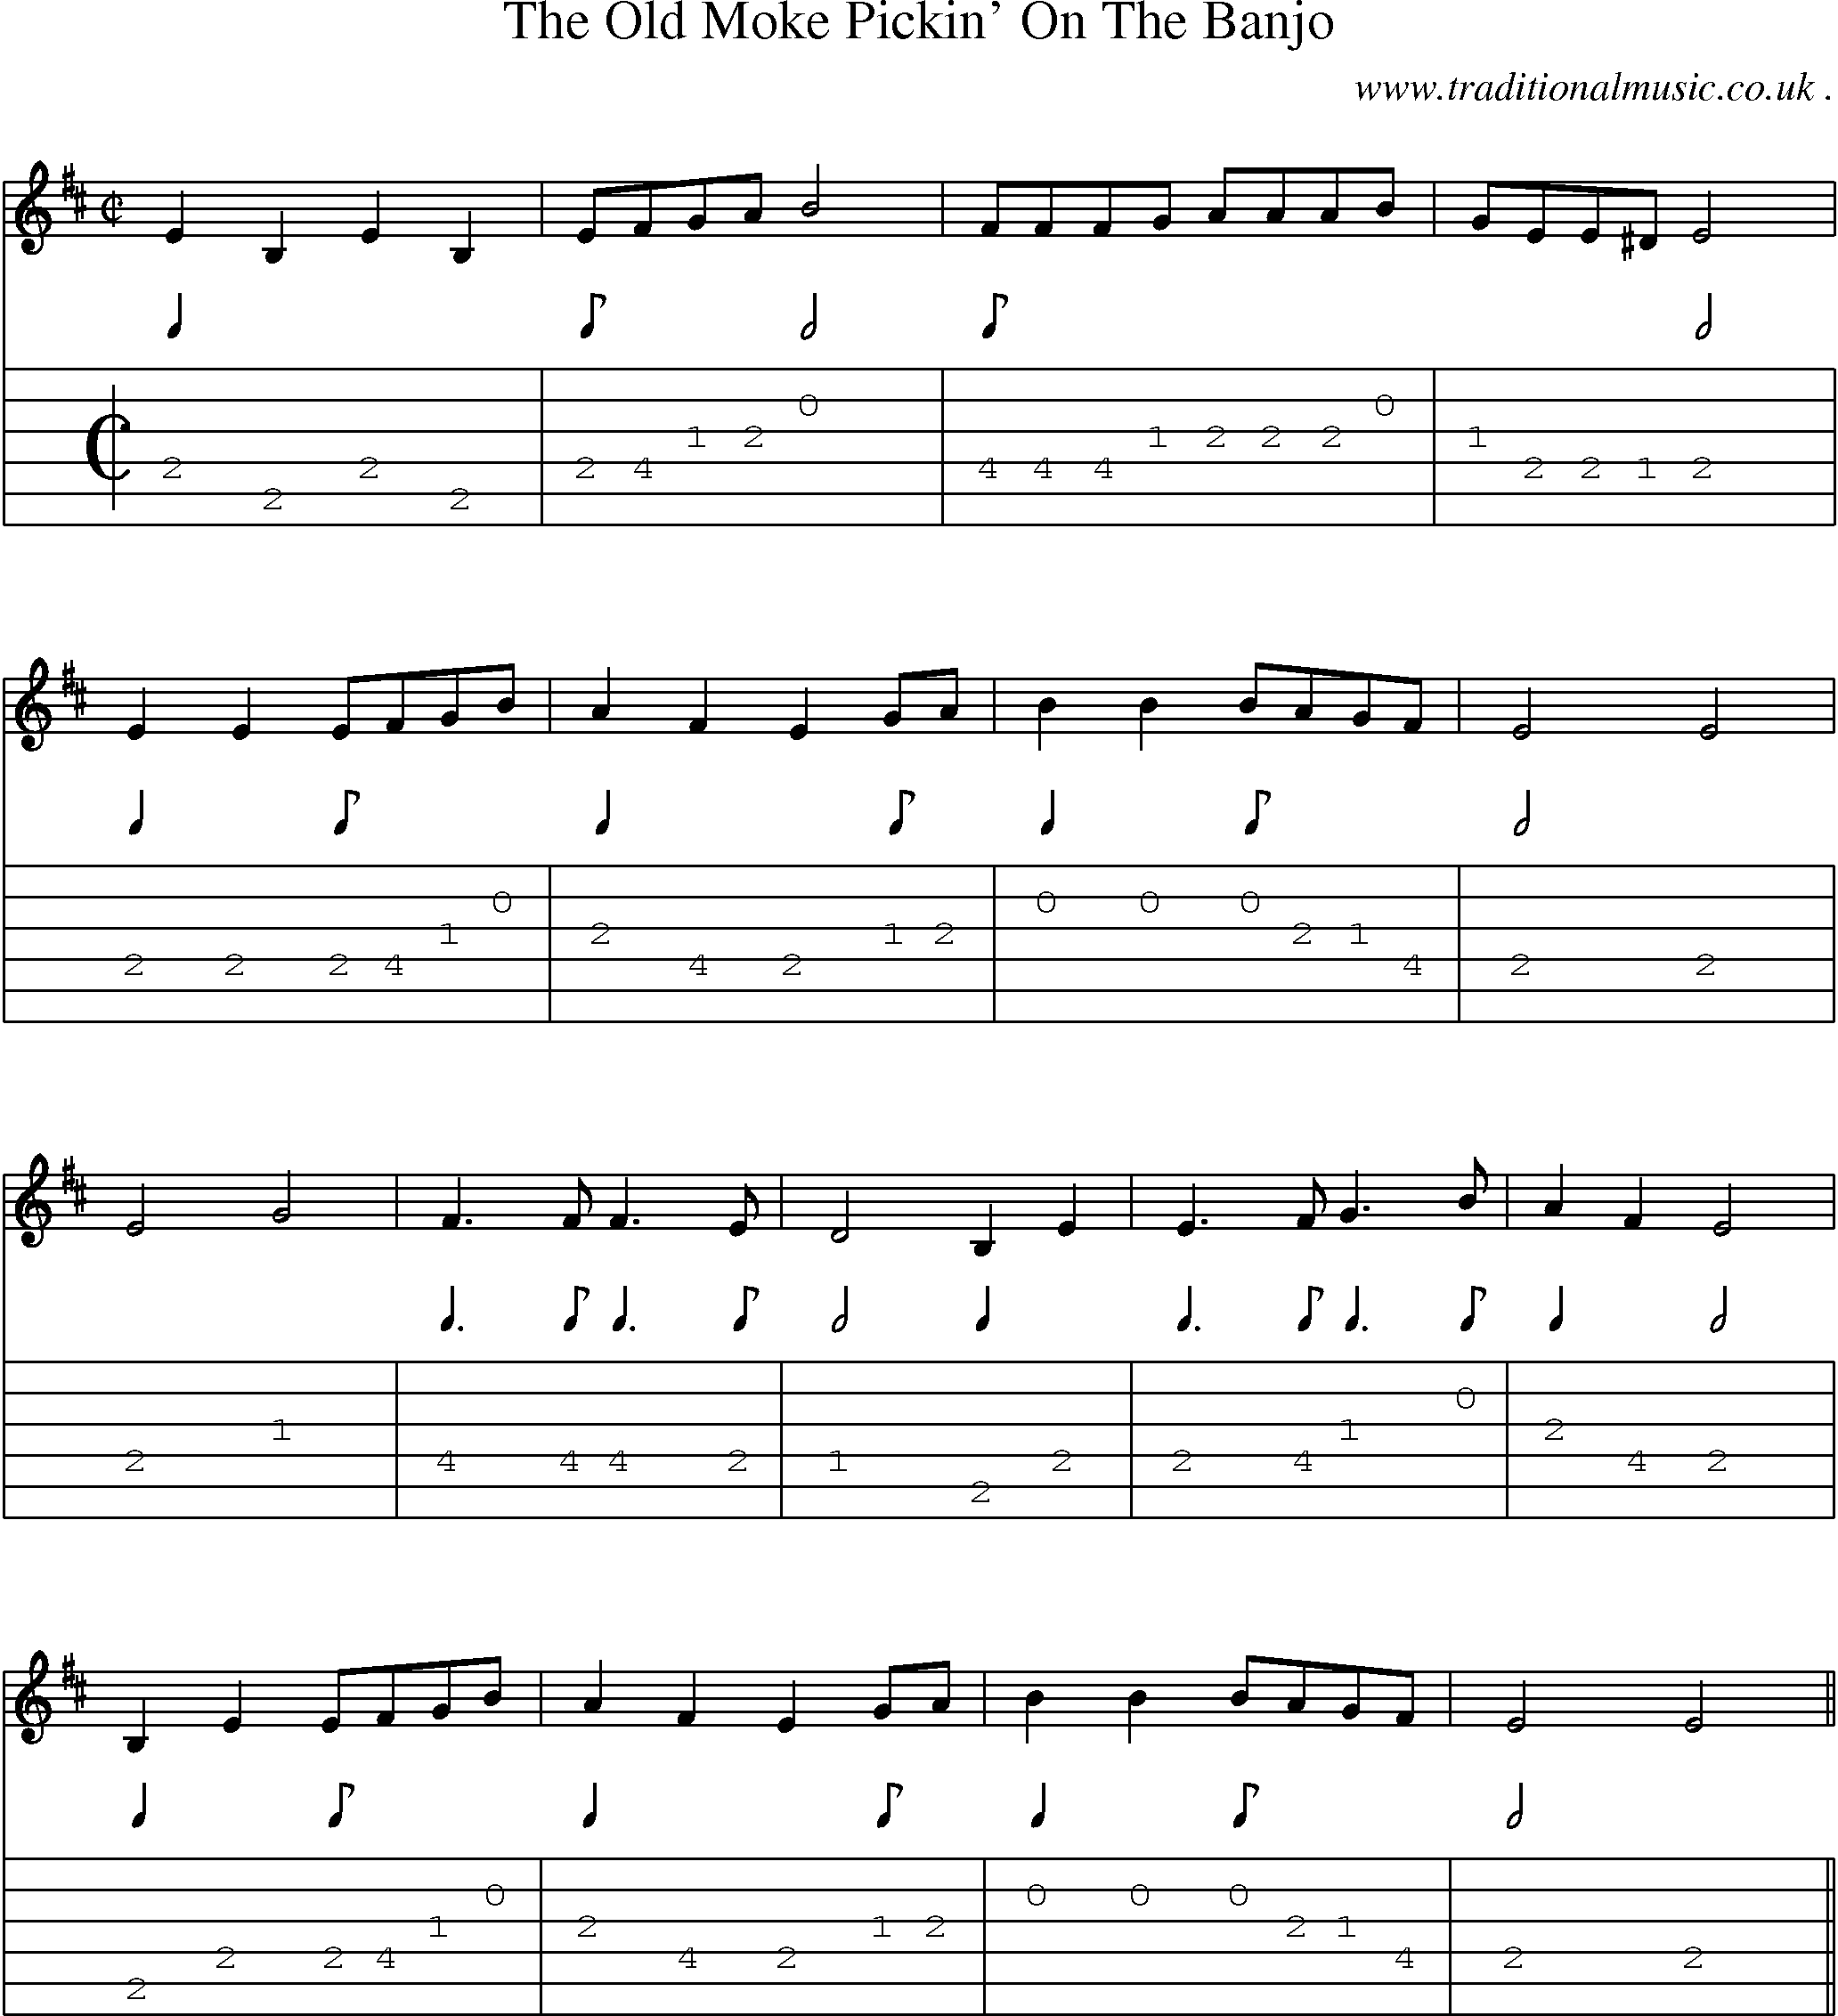 Sheet-Music and Guitar Tabs for The Old Moke Pickin On The Banjo